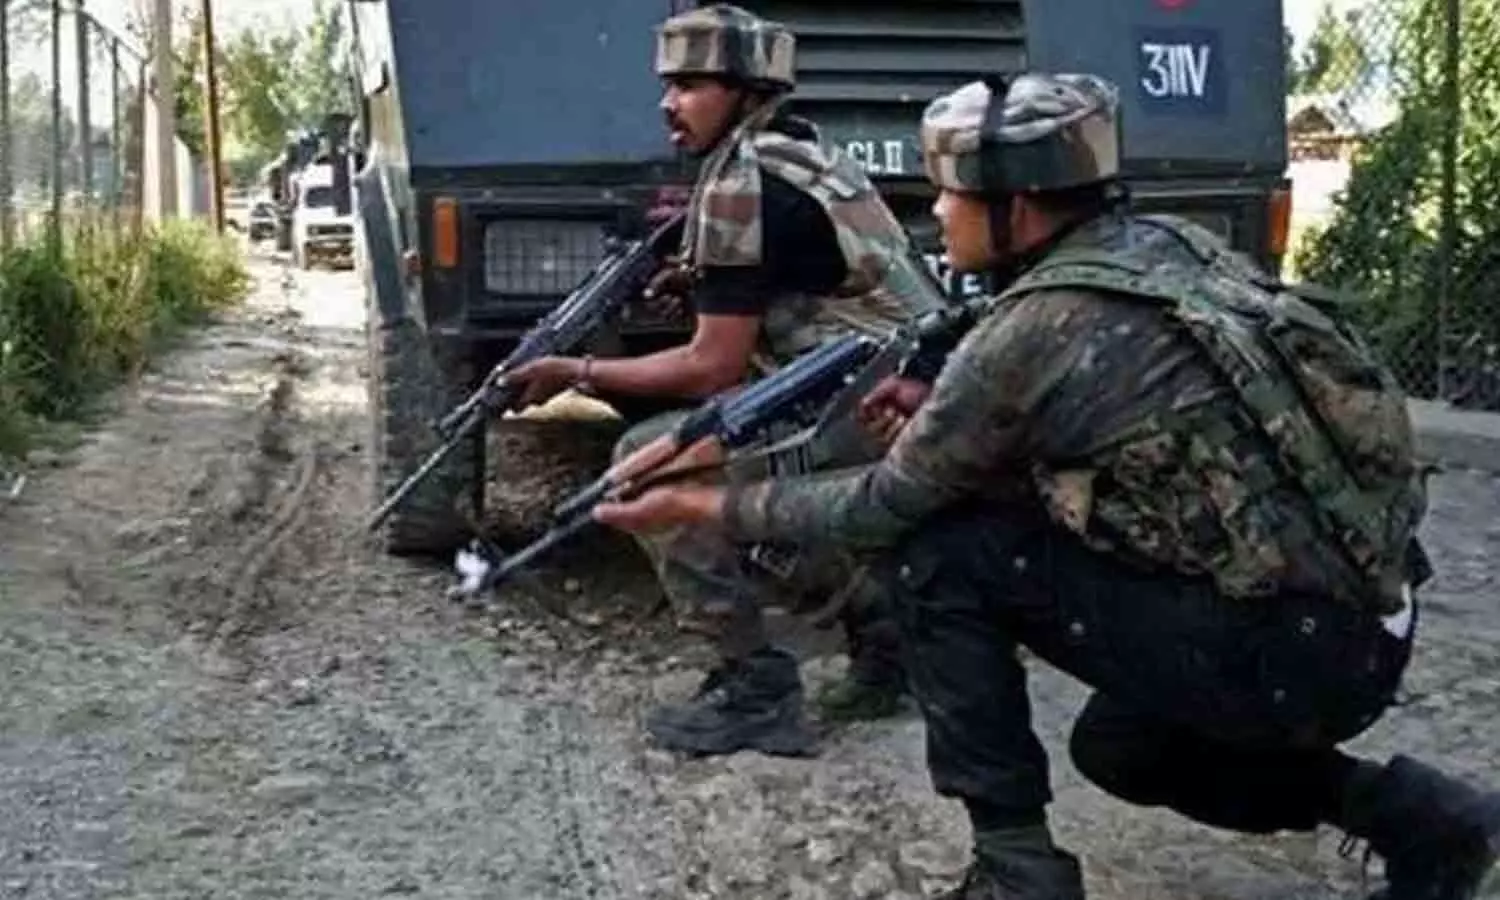 J&K: Security forces kill two terrorists in Shopian, encounter continues